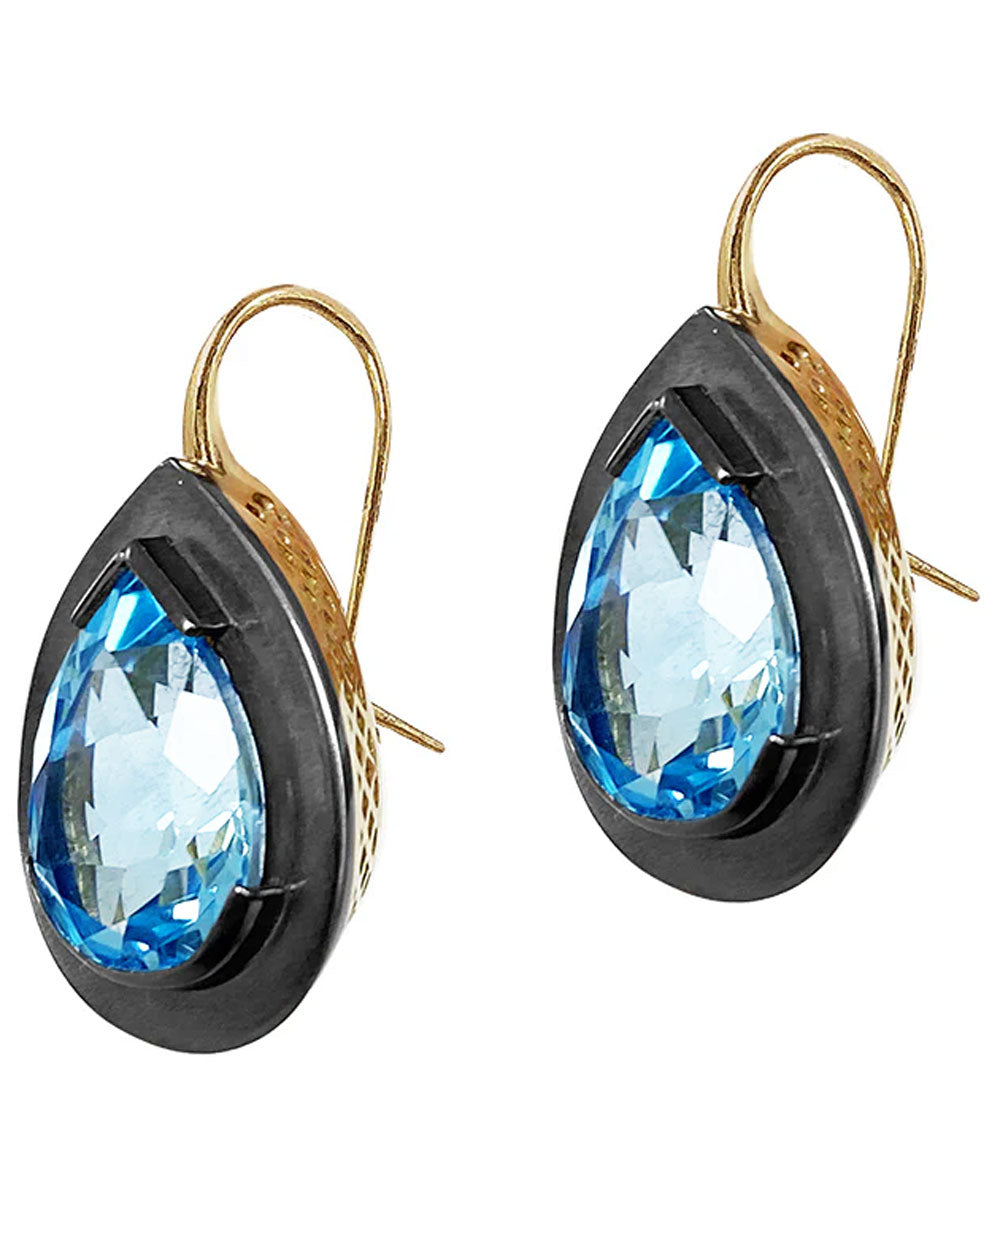 Oxidized Silver and Blue Topaz Earrings